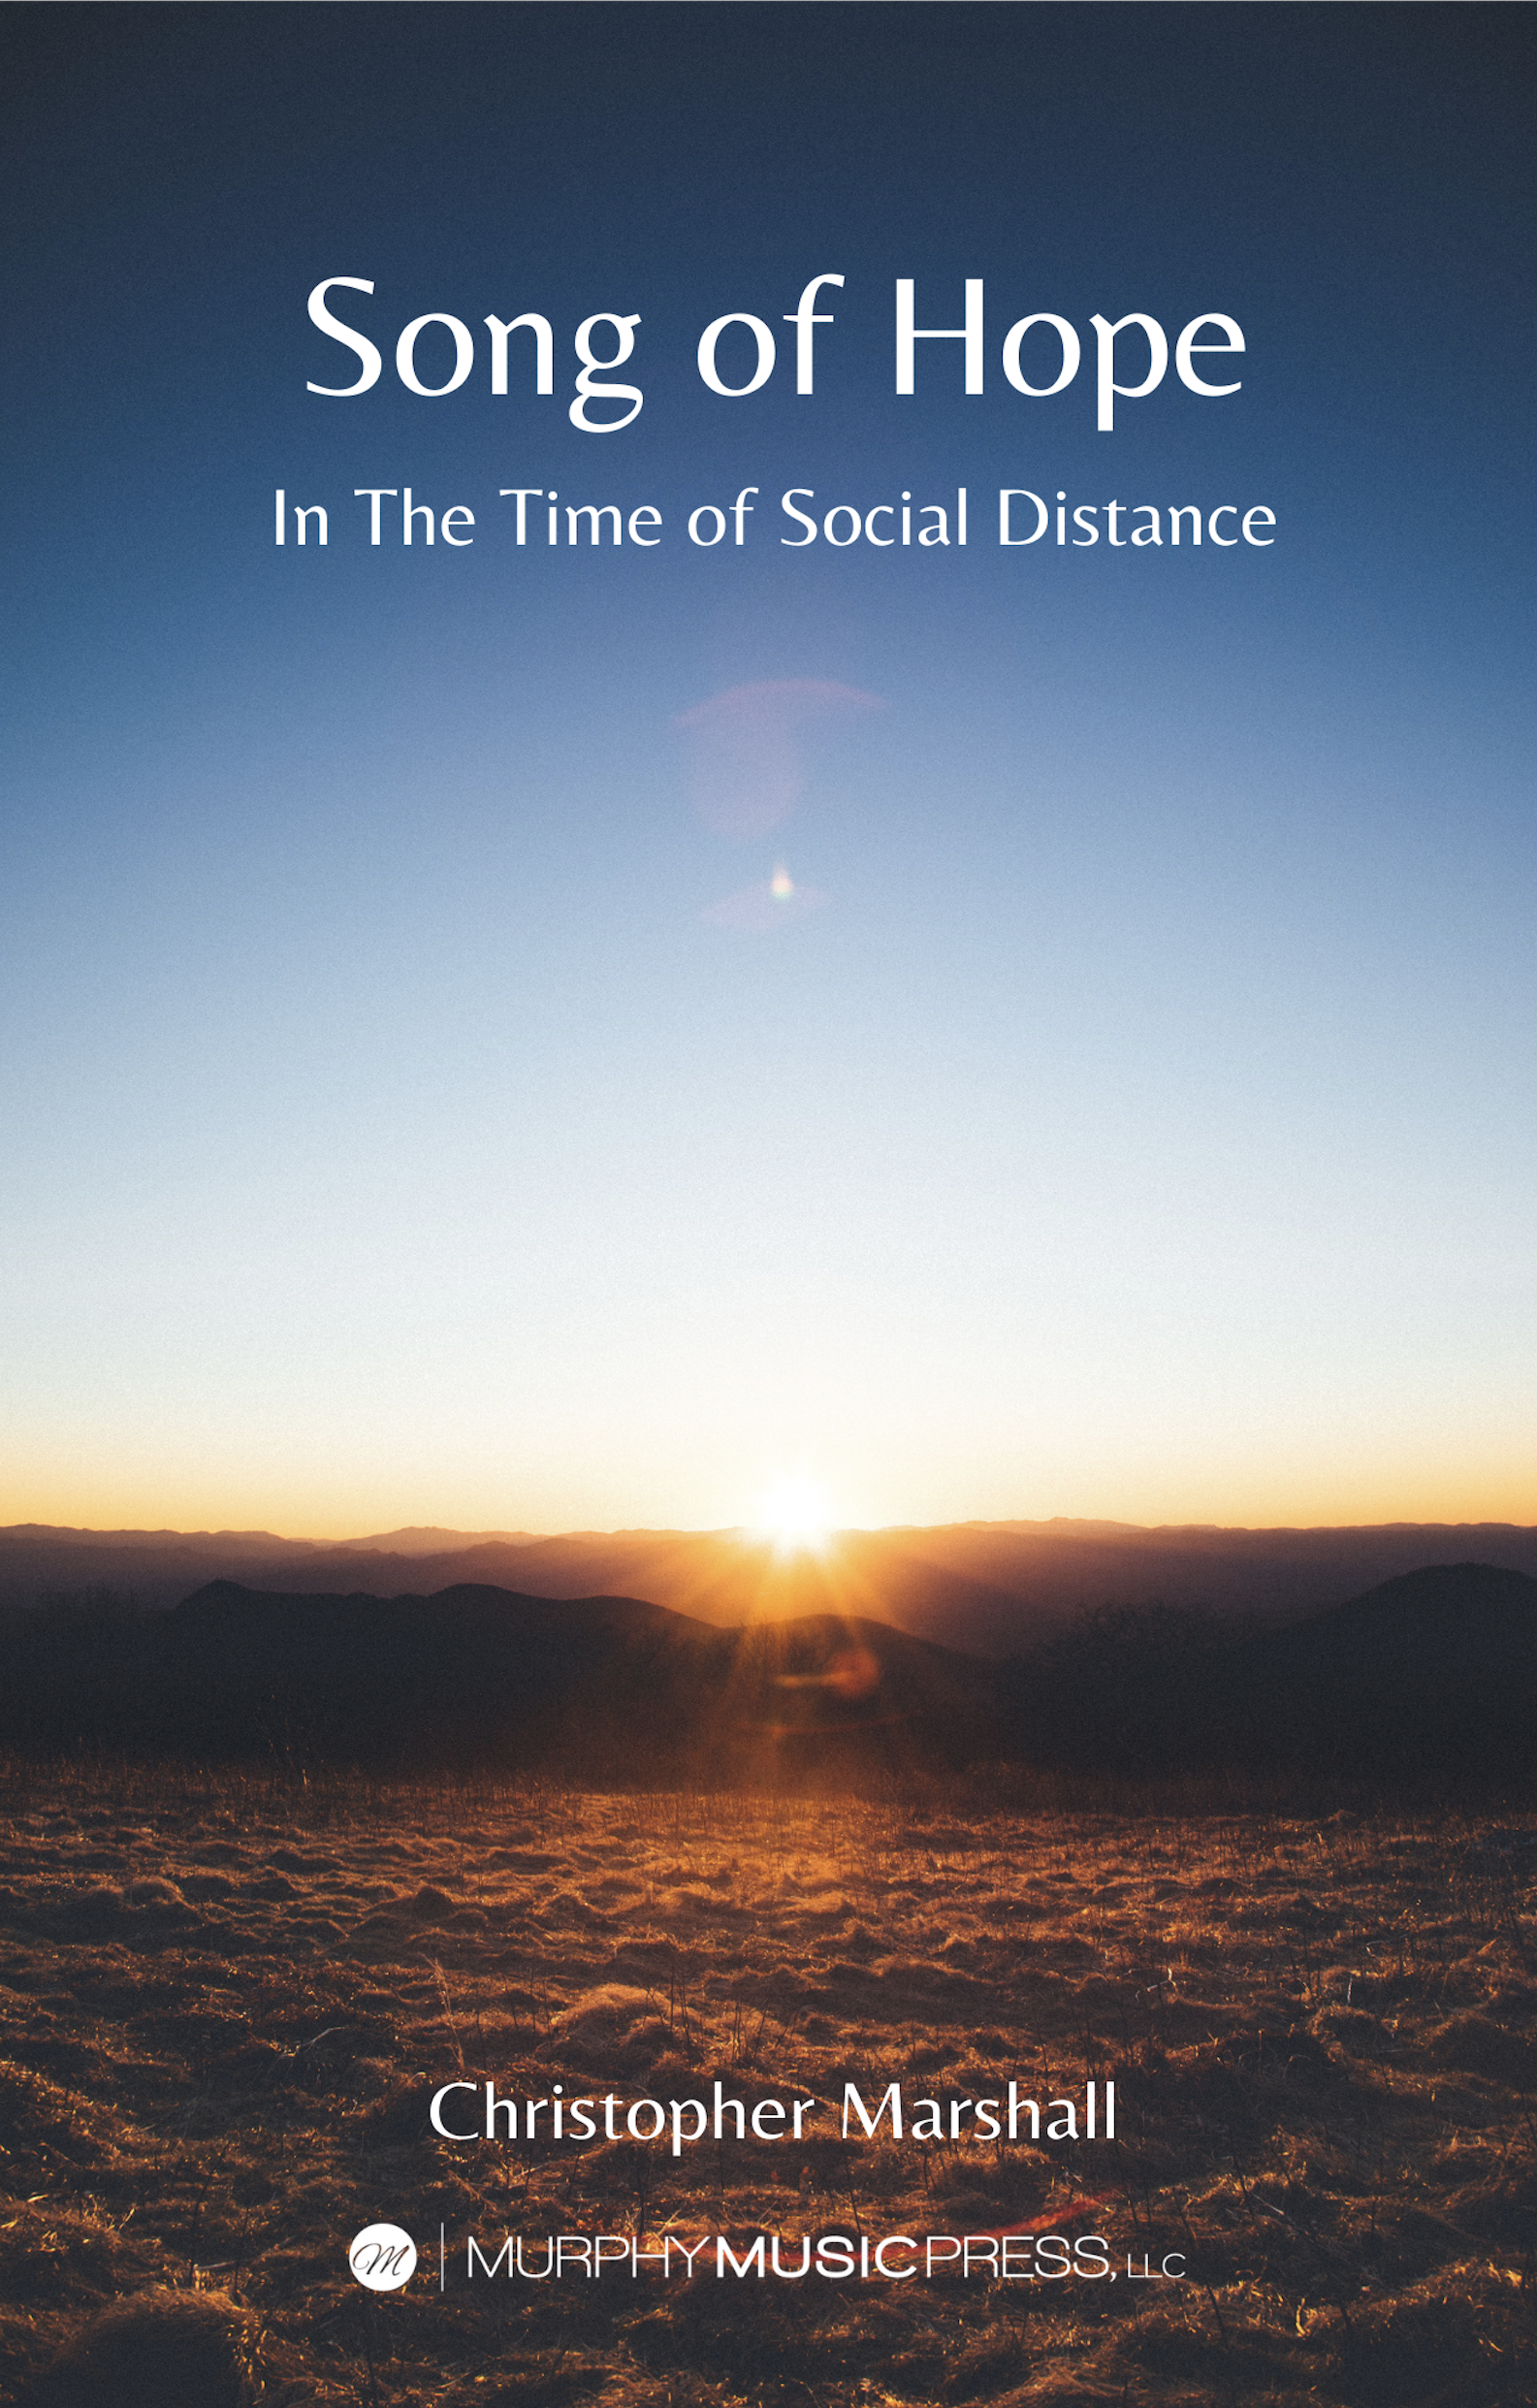 Song Of Hope (In The Time Of Social Distance) by Christopher Marshall